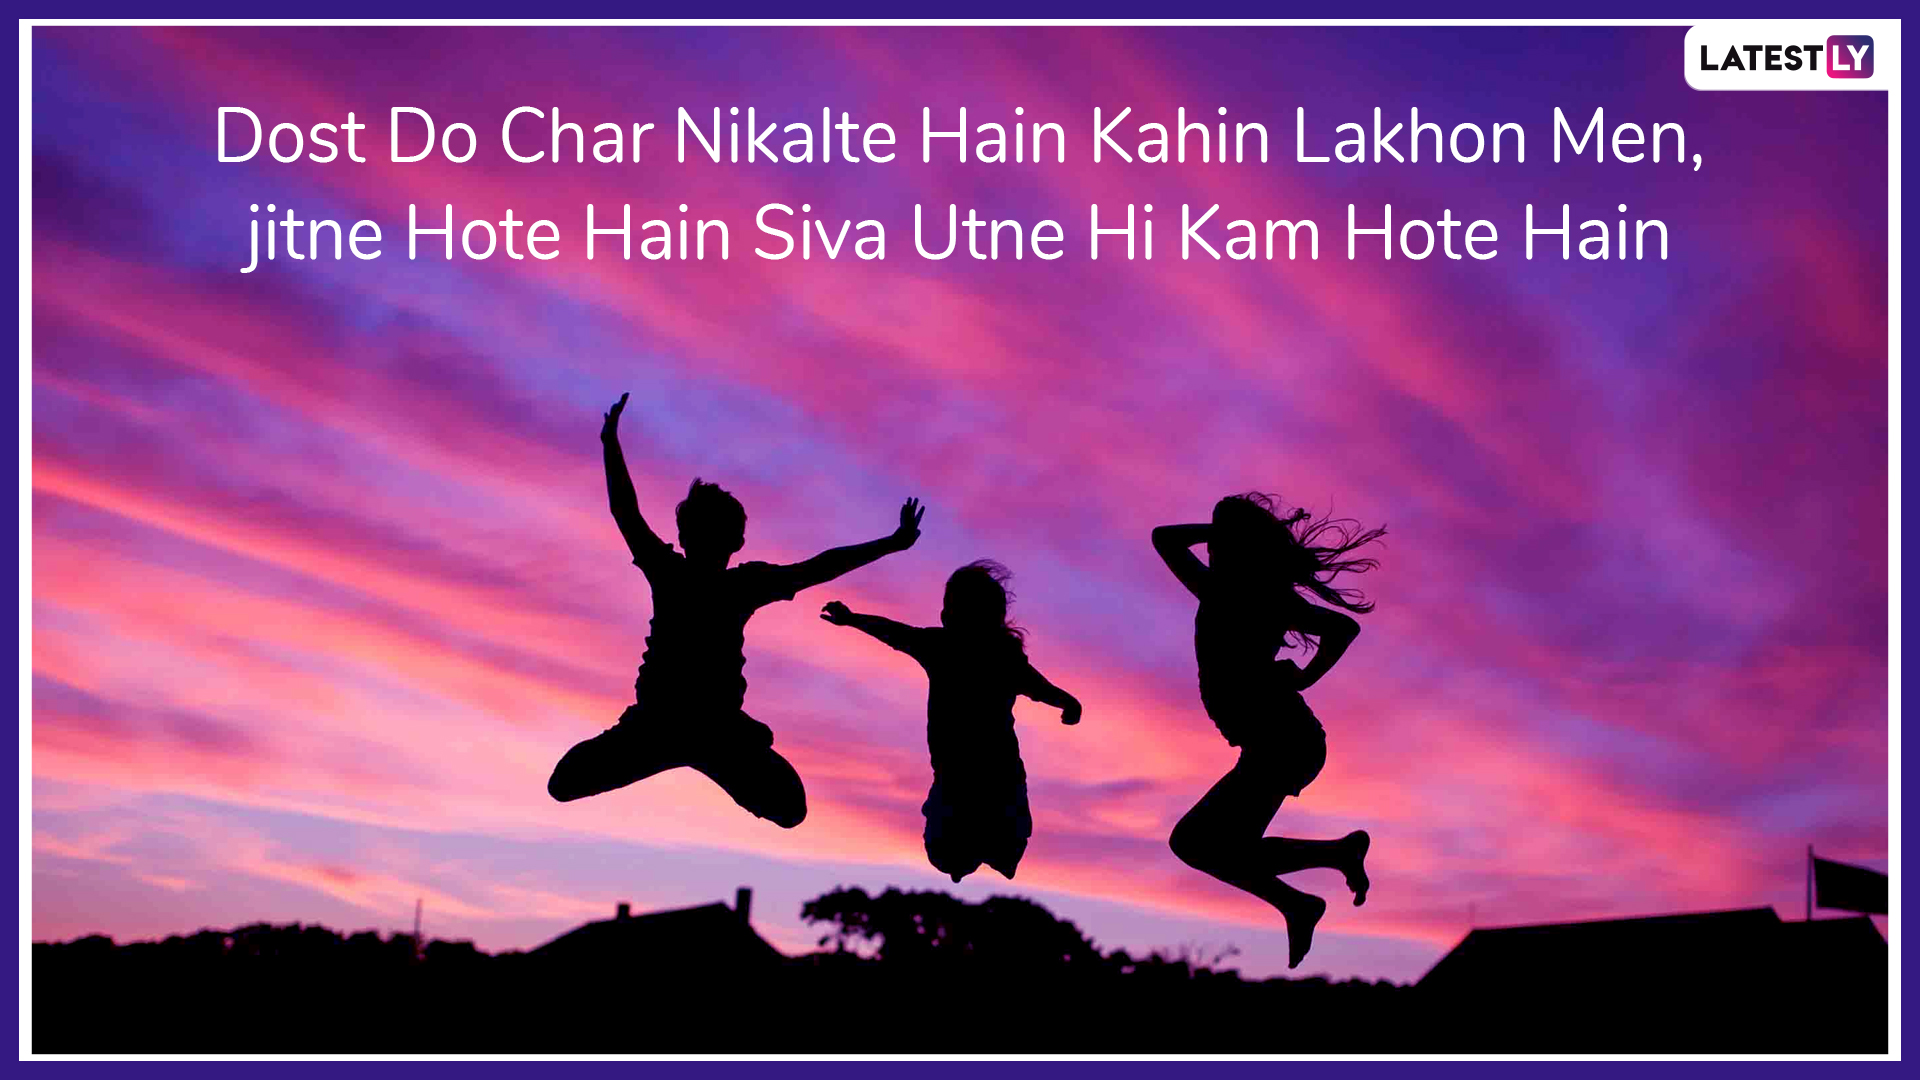 Friendship Day 2019 Wishes Dosti Shayari In Hindi And Urdu Friendship Poetry Whatsapp Stickers Gif Image Greetings Sms To Share With Bffs Latestly